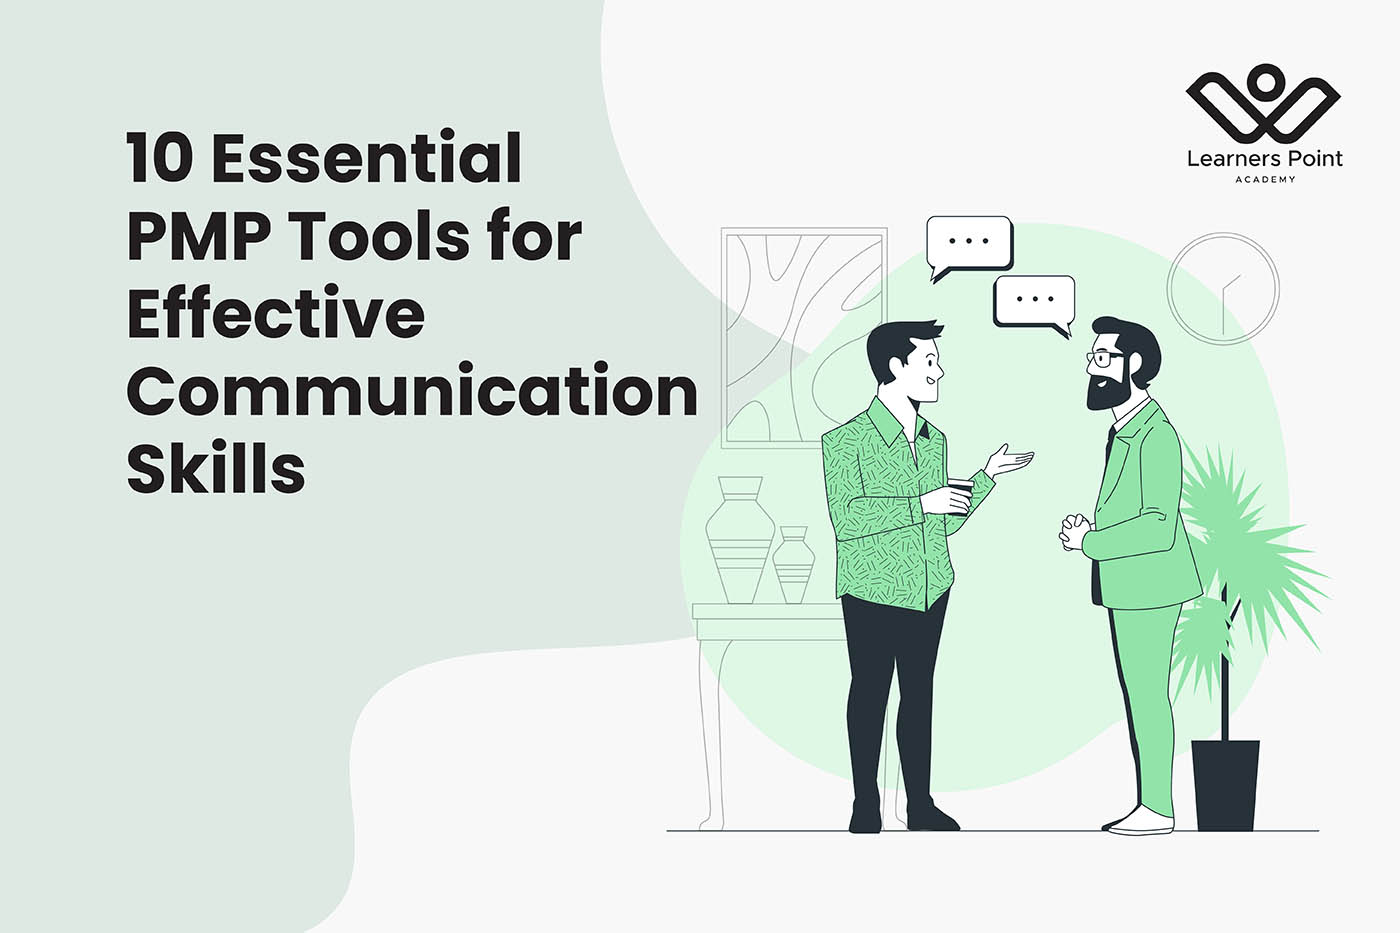 10 Essential PMP Tools for Effective Communication Skills